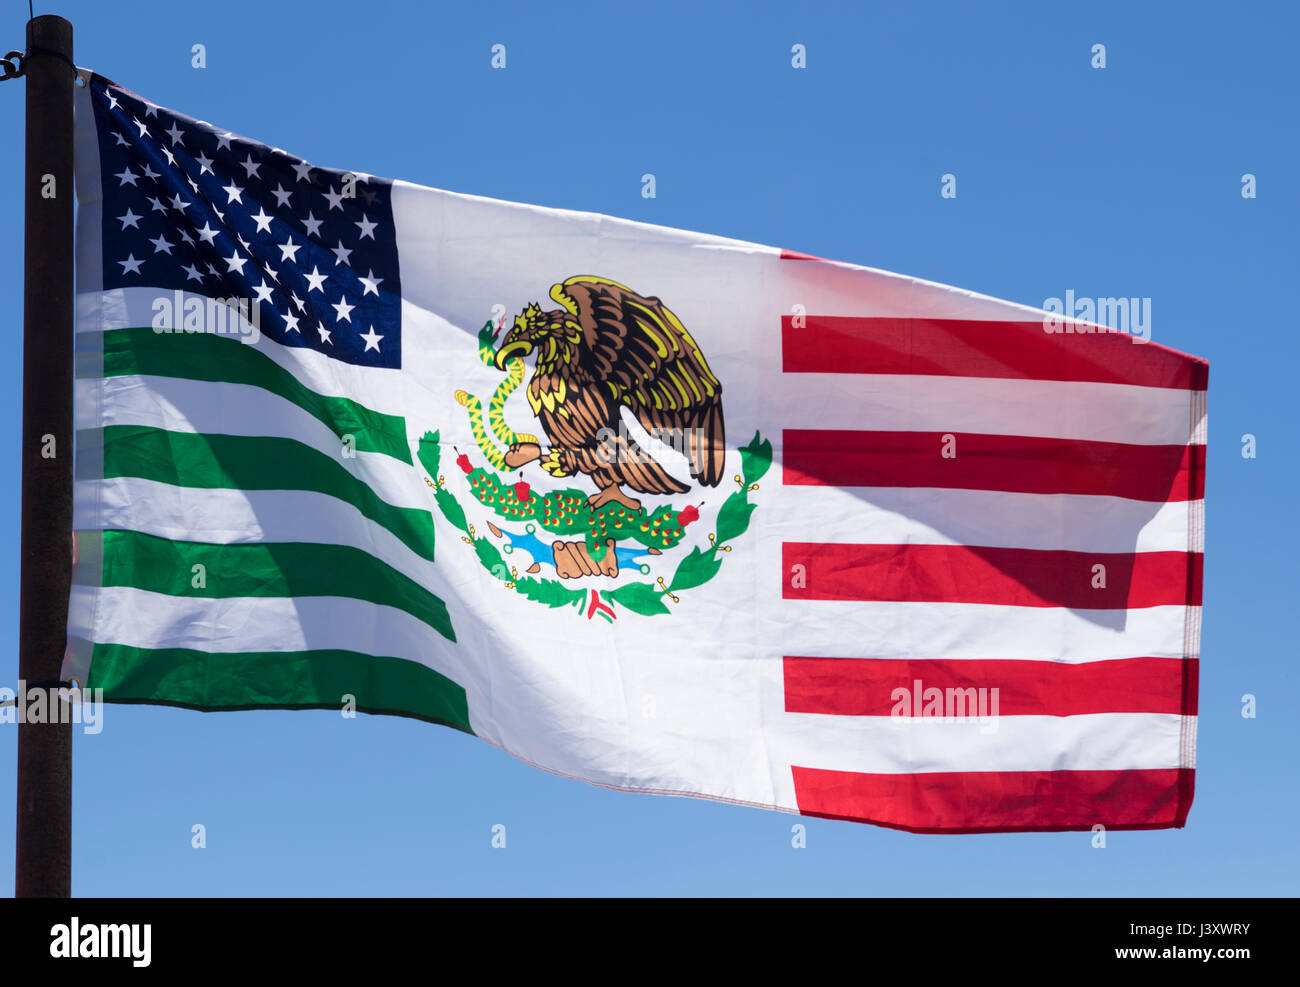 A flag intended to celebrate the American-Mexican friendship flies during the Fiesta Protesta annual demonstration held in Lajitas, Texas. Stock Photo